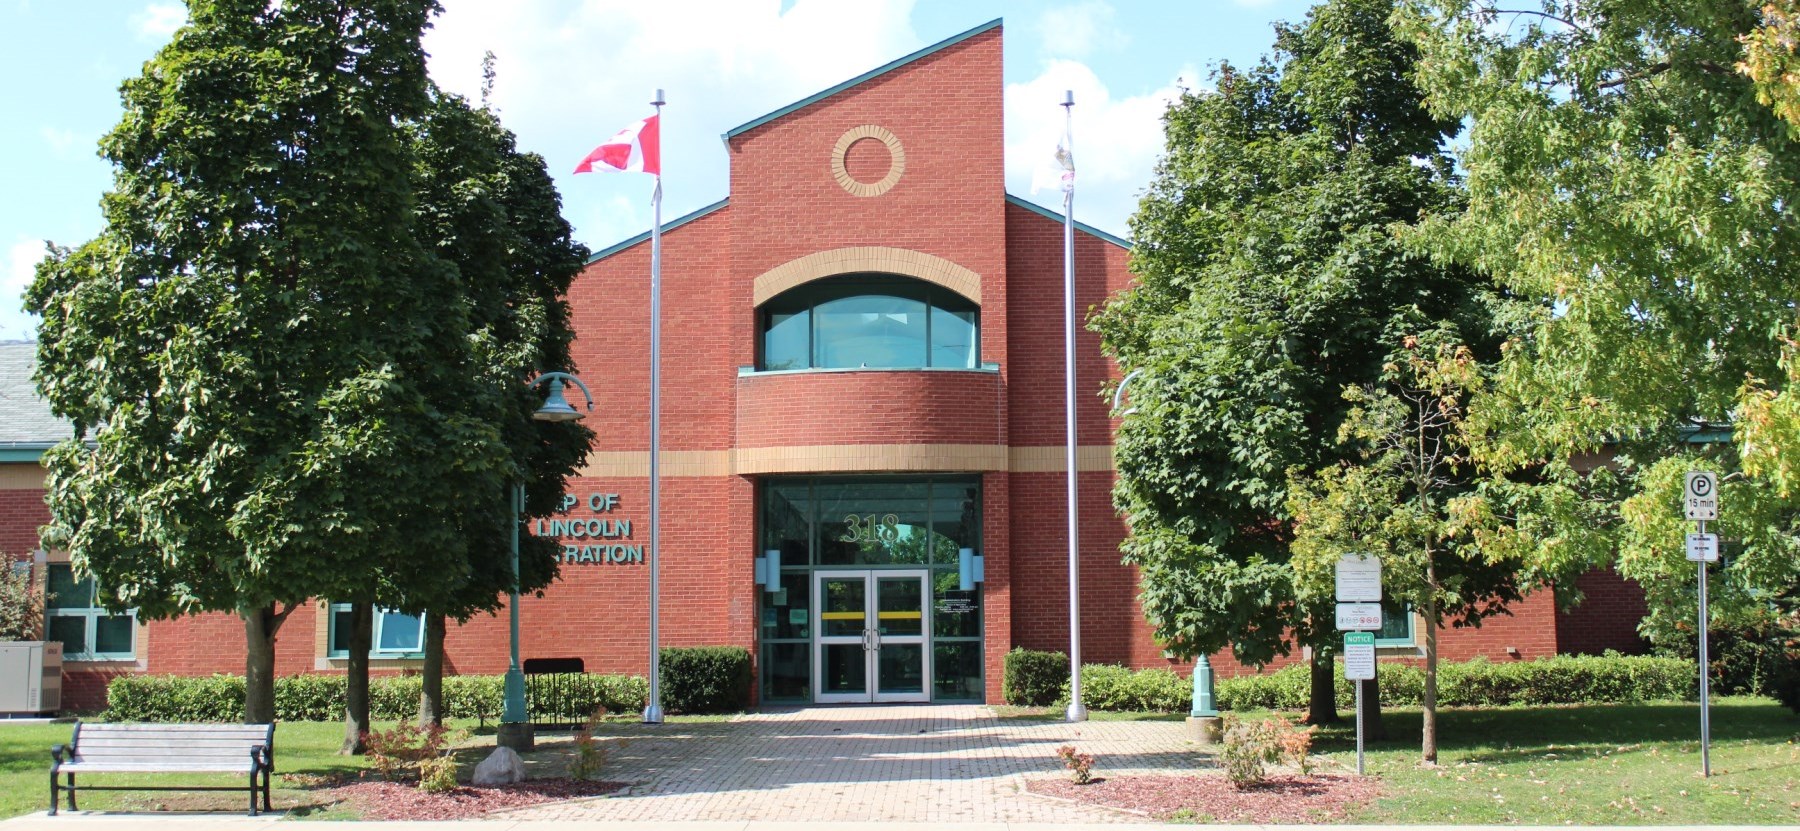 Ontario Mayor denied access to Township Office due to Vaccination Status